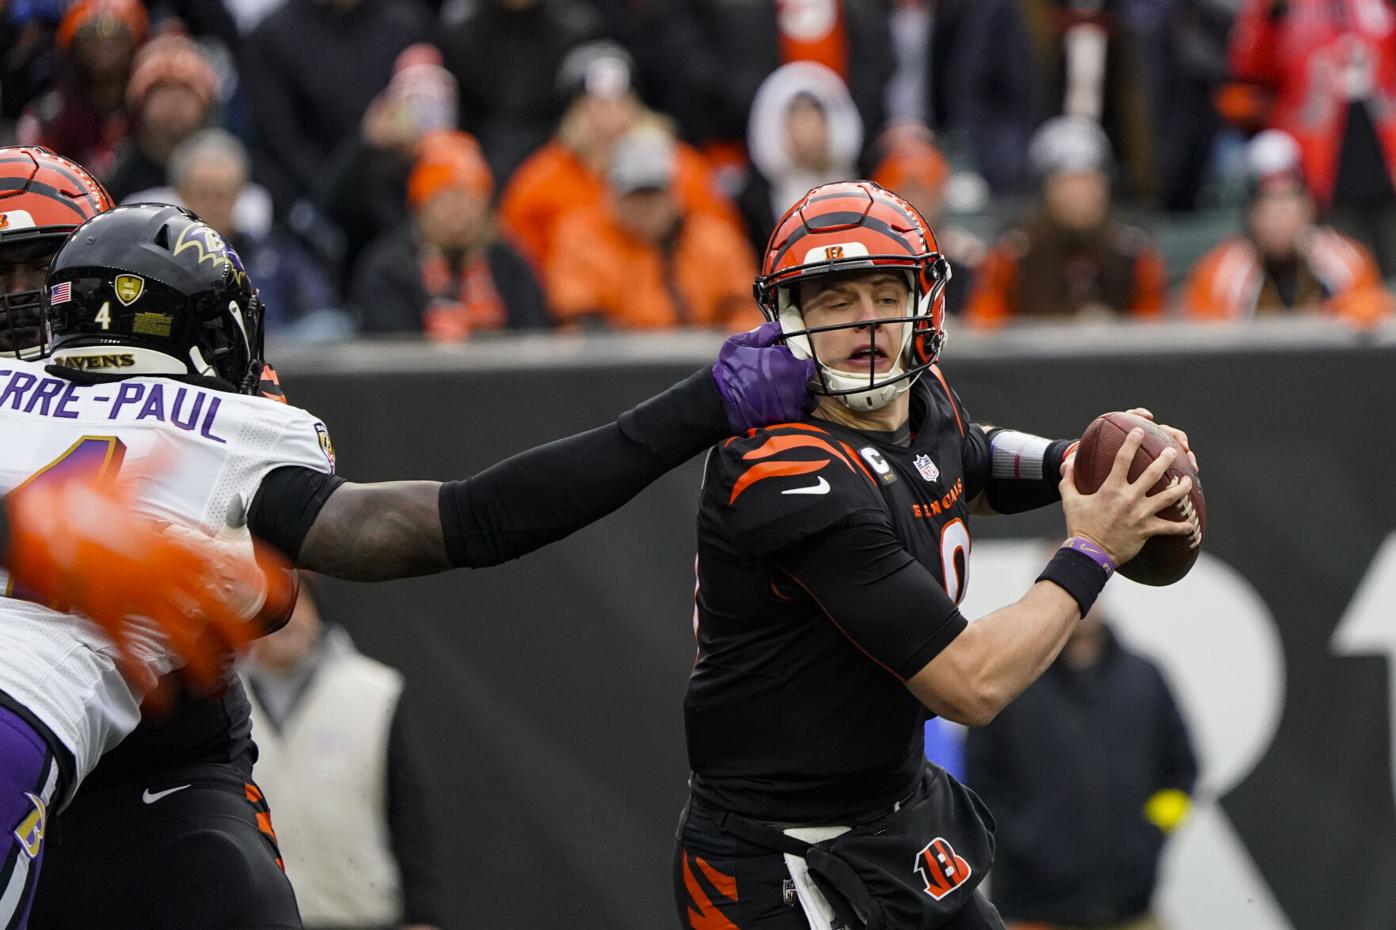 Instant analysis after Bengals beat Ravens, setting up playoff rematch